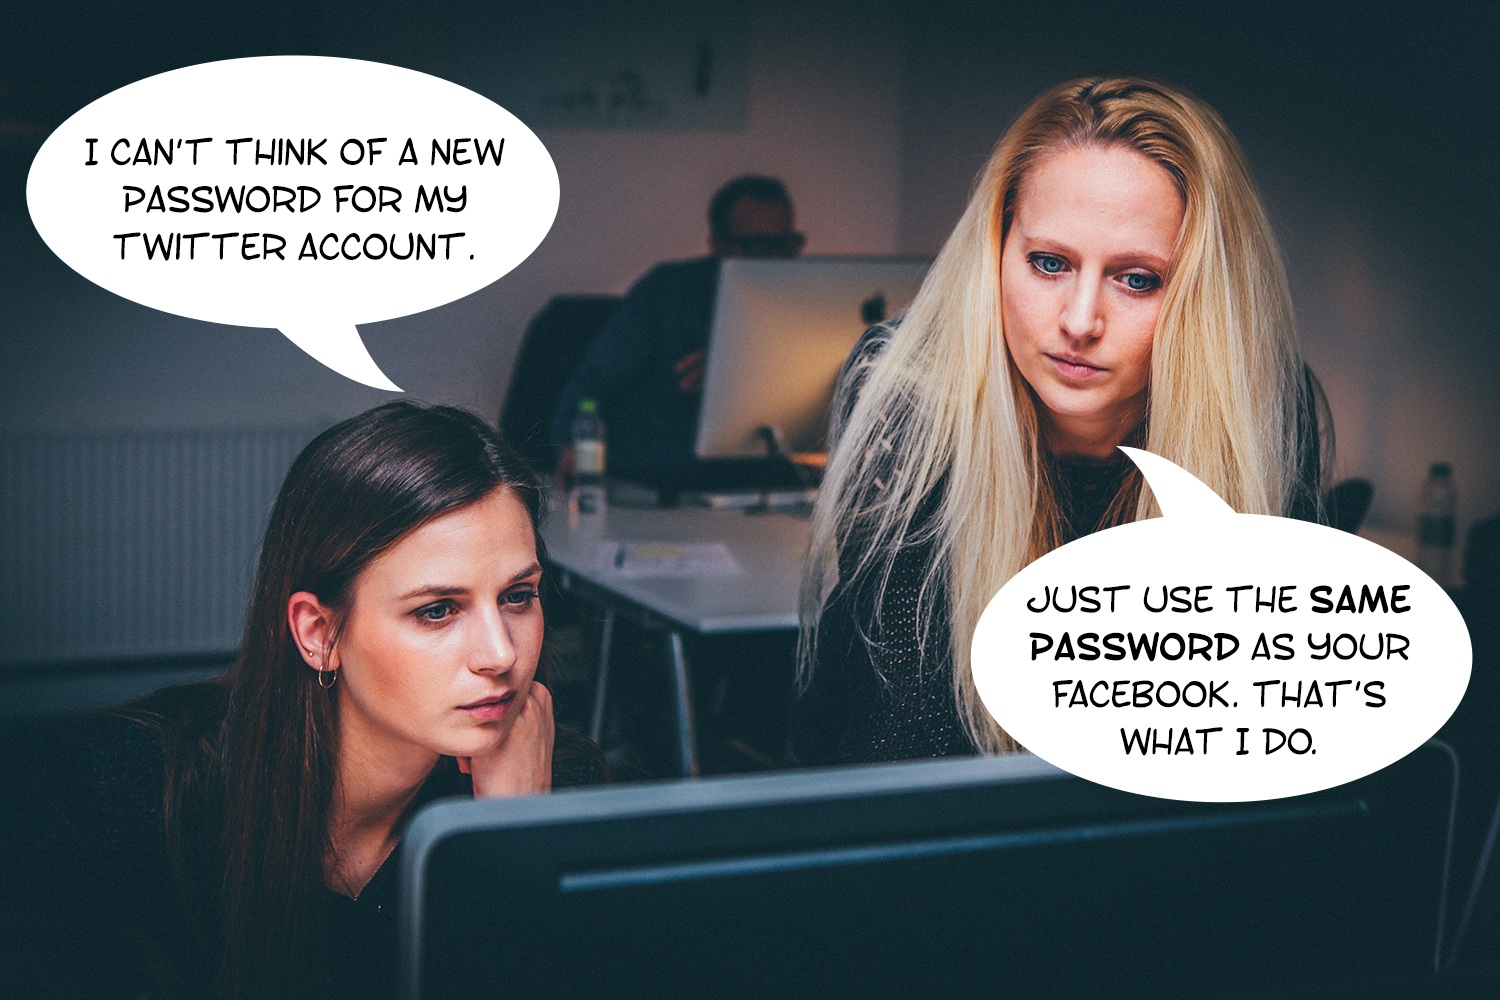 Girl with bad password habits advising to use the same password on multiple accounts